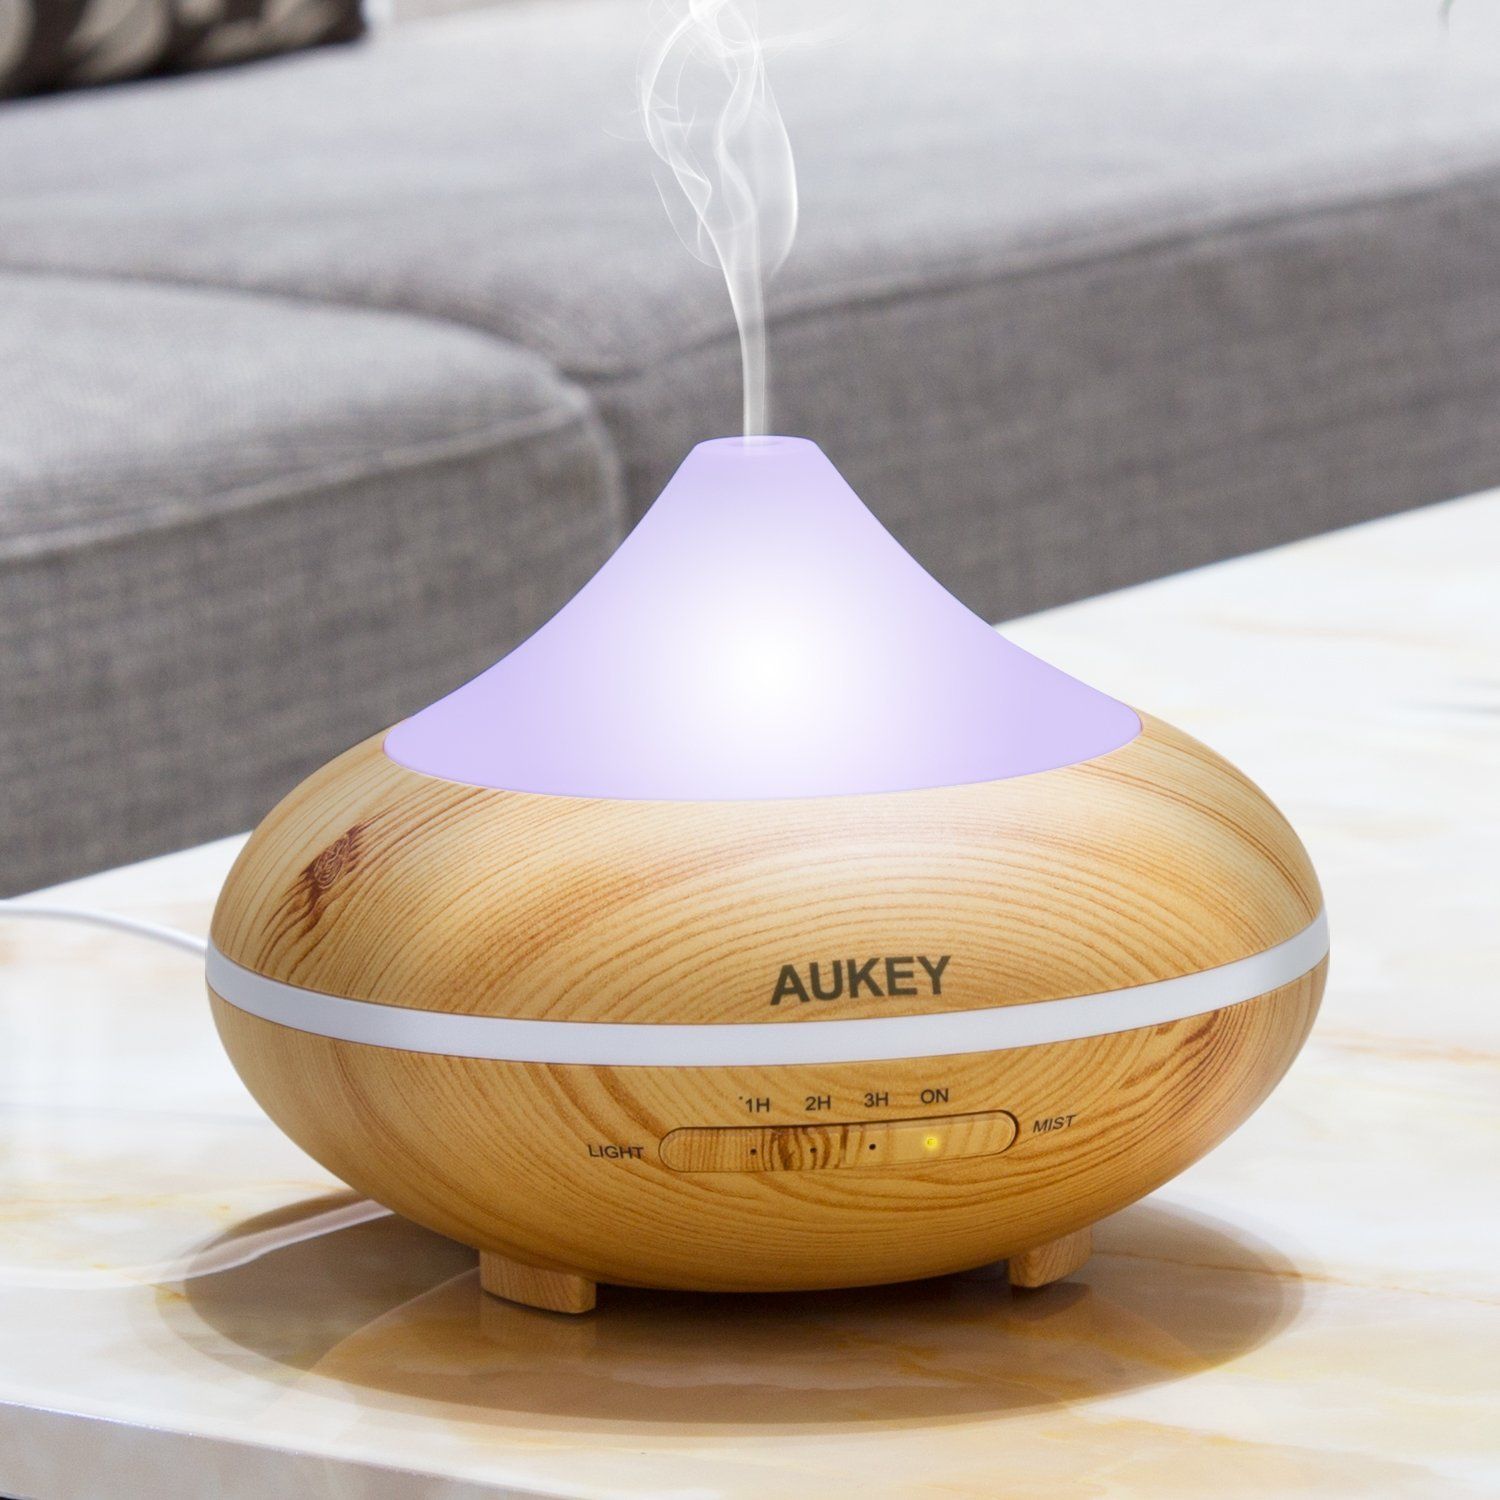 Aukey BE-A1